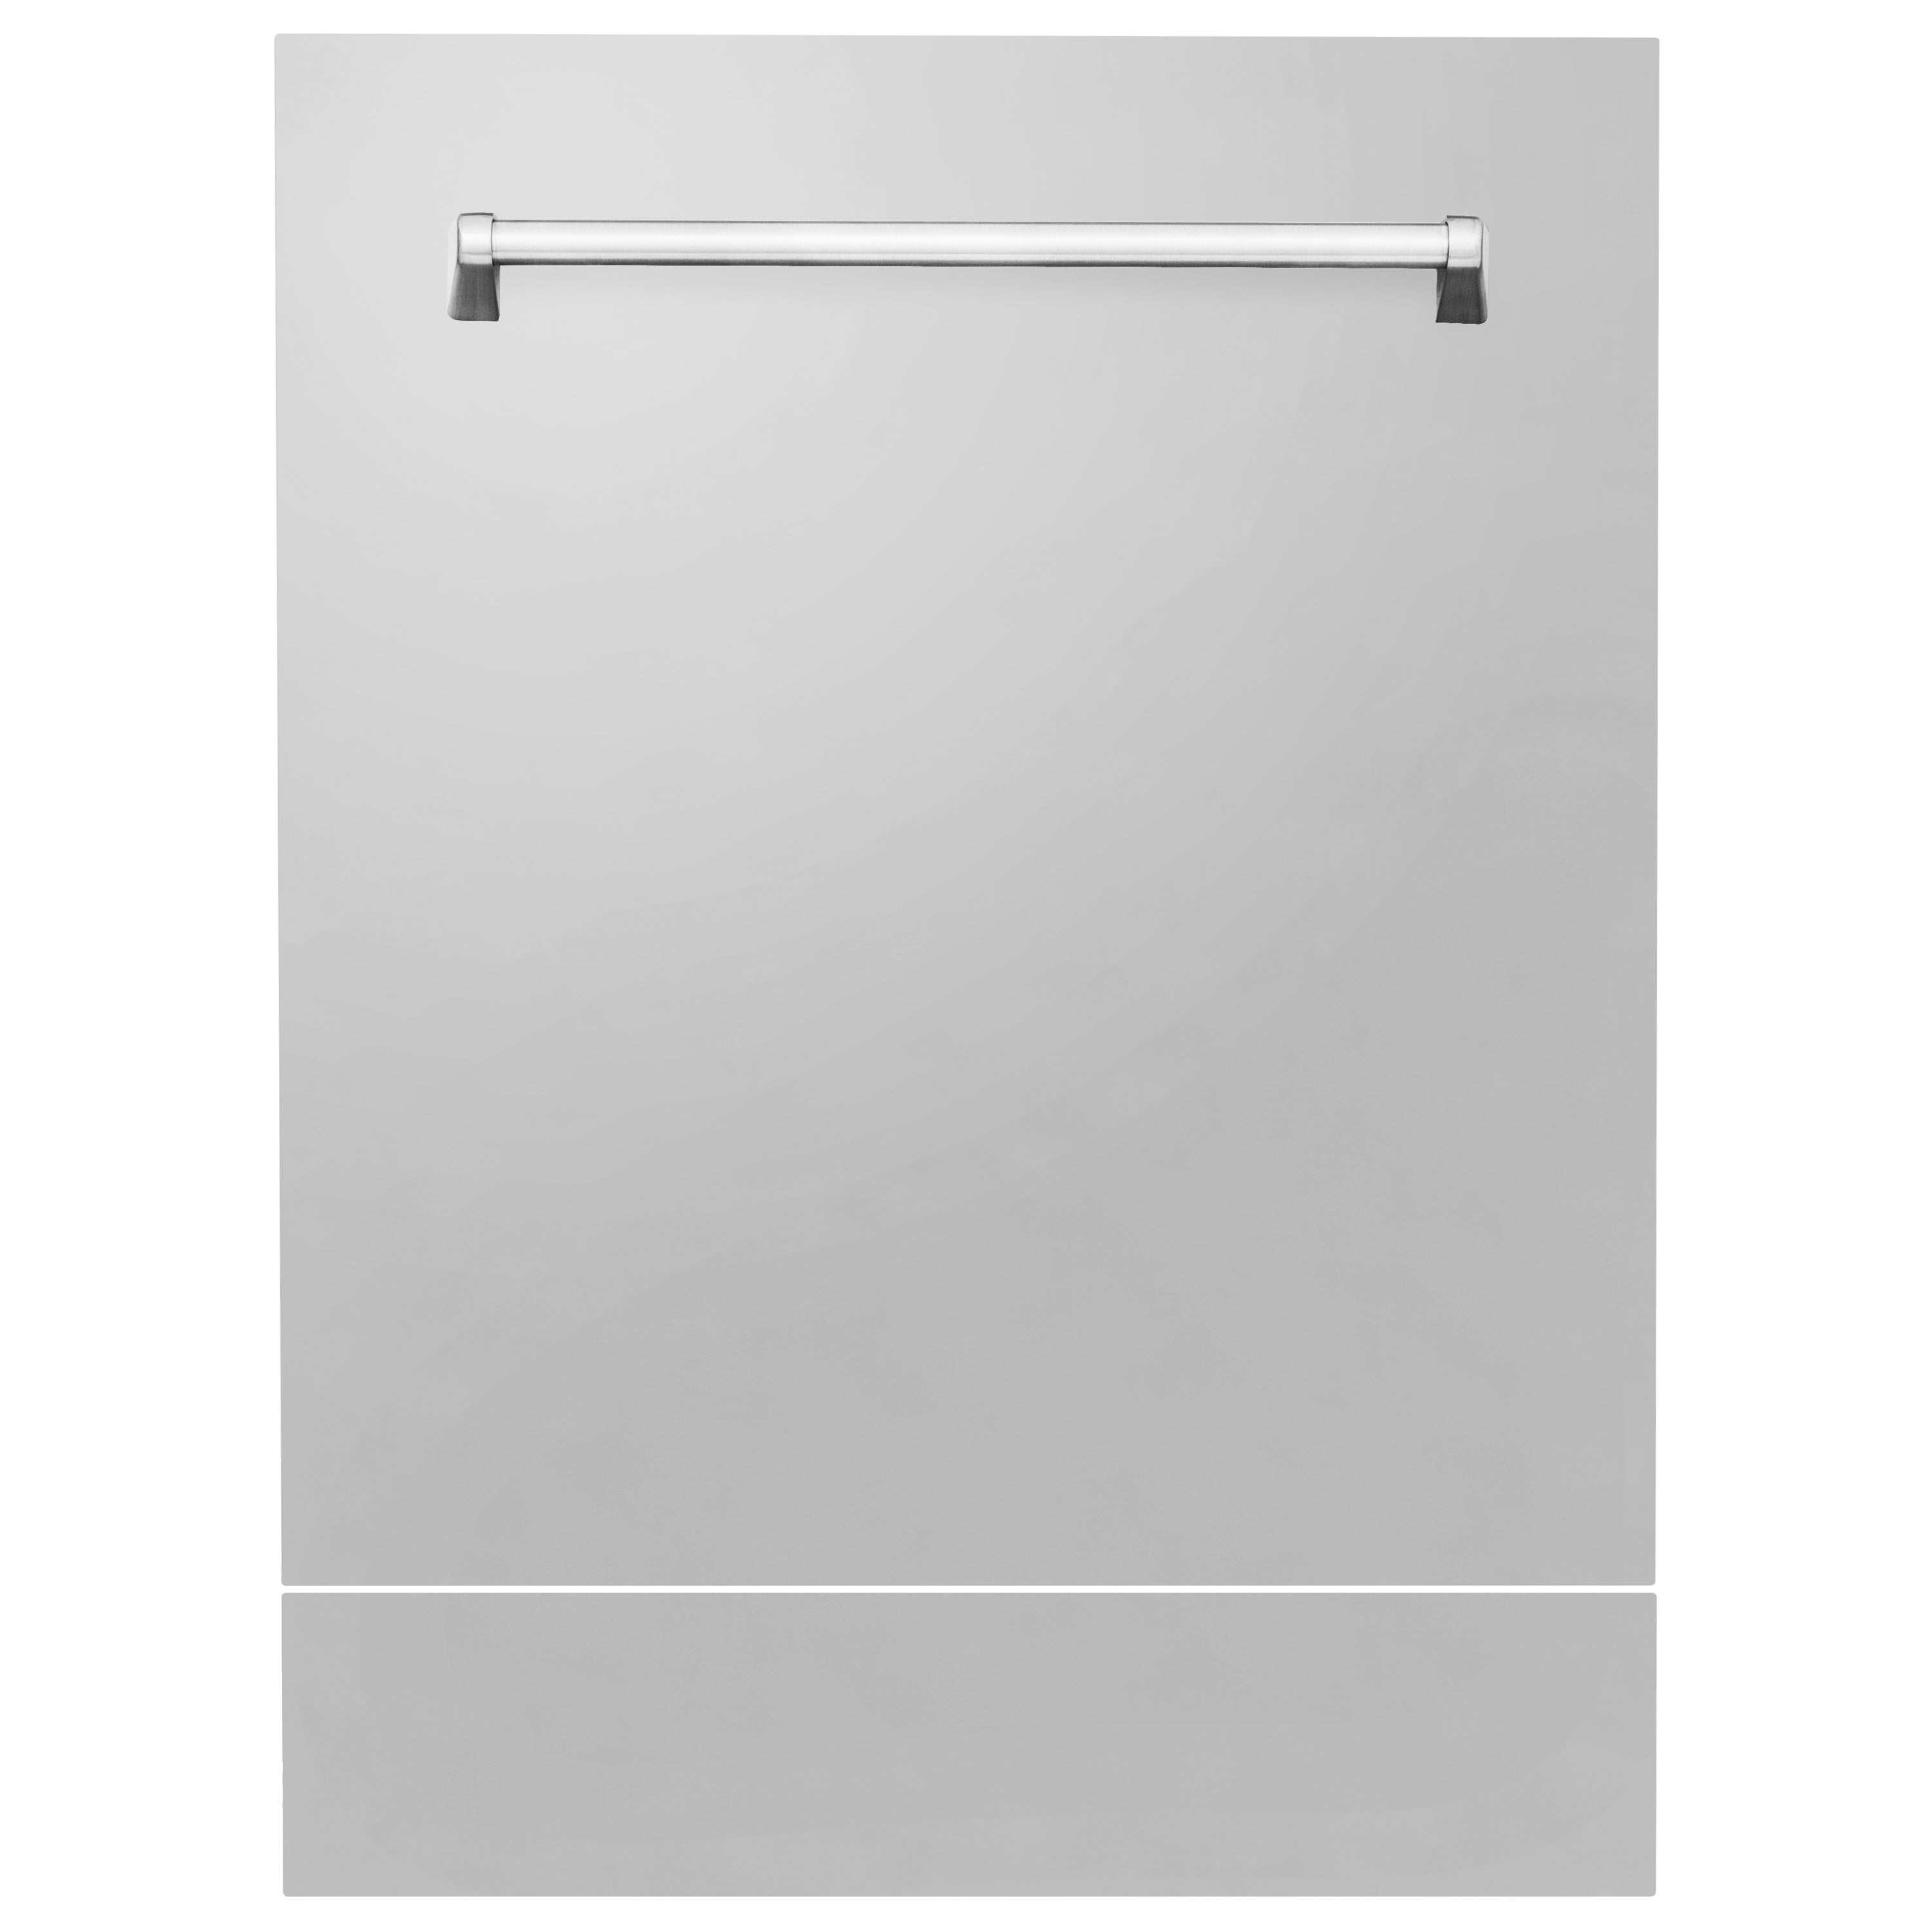 ZLINE 24" Tallac Tall Tub Dishwasher Panel in Stainless Steel with Traditional Handle